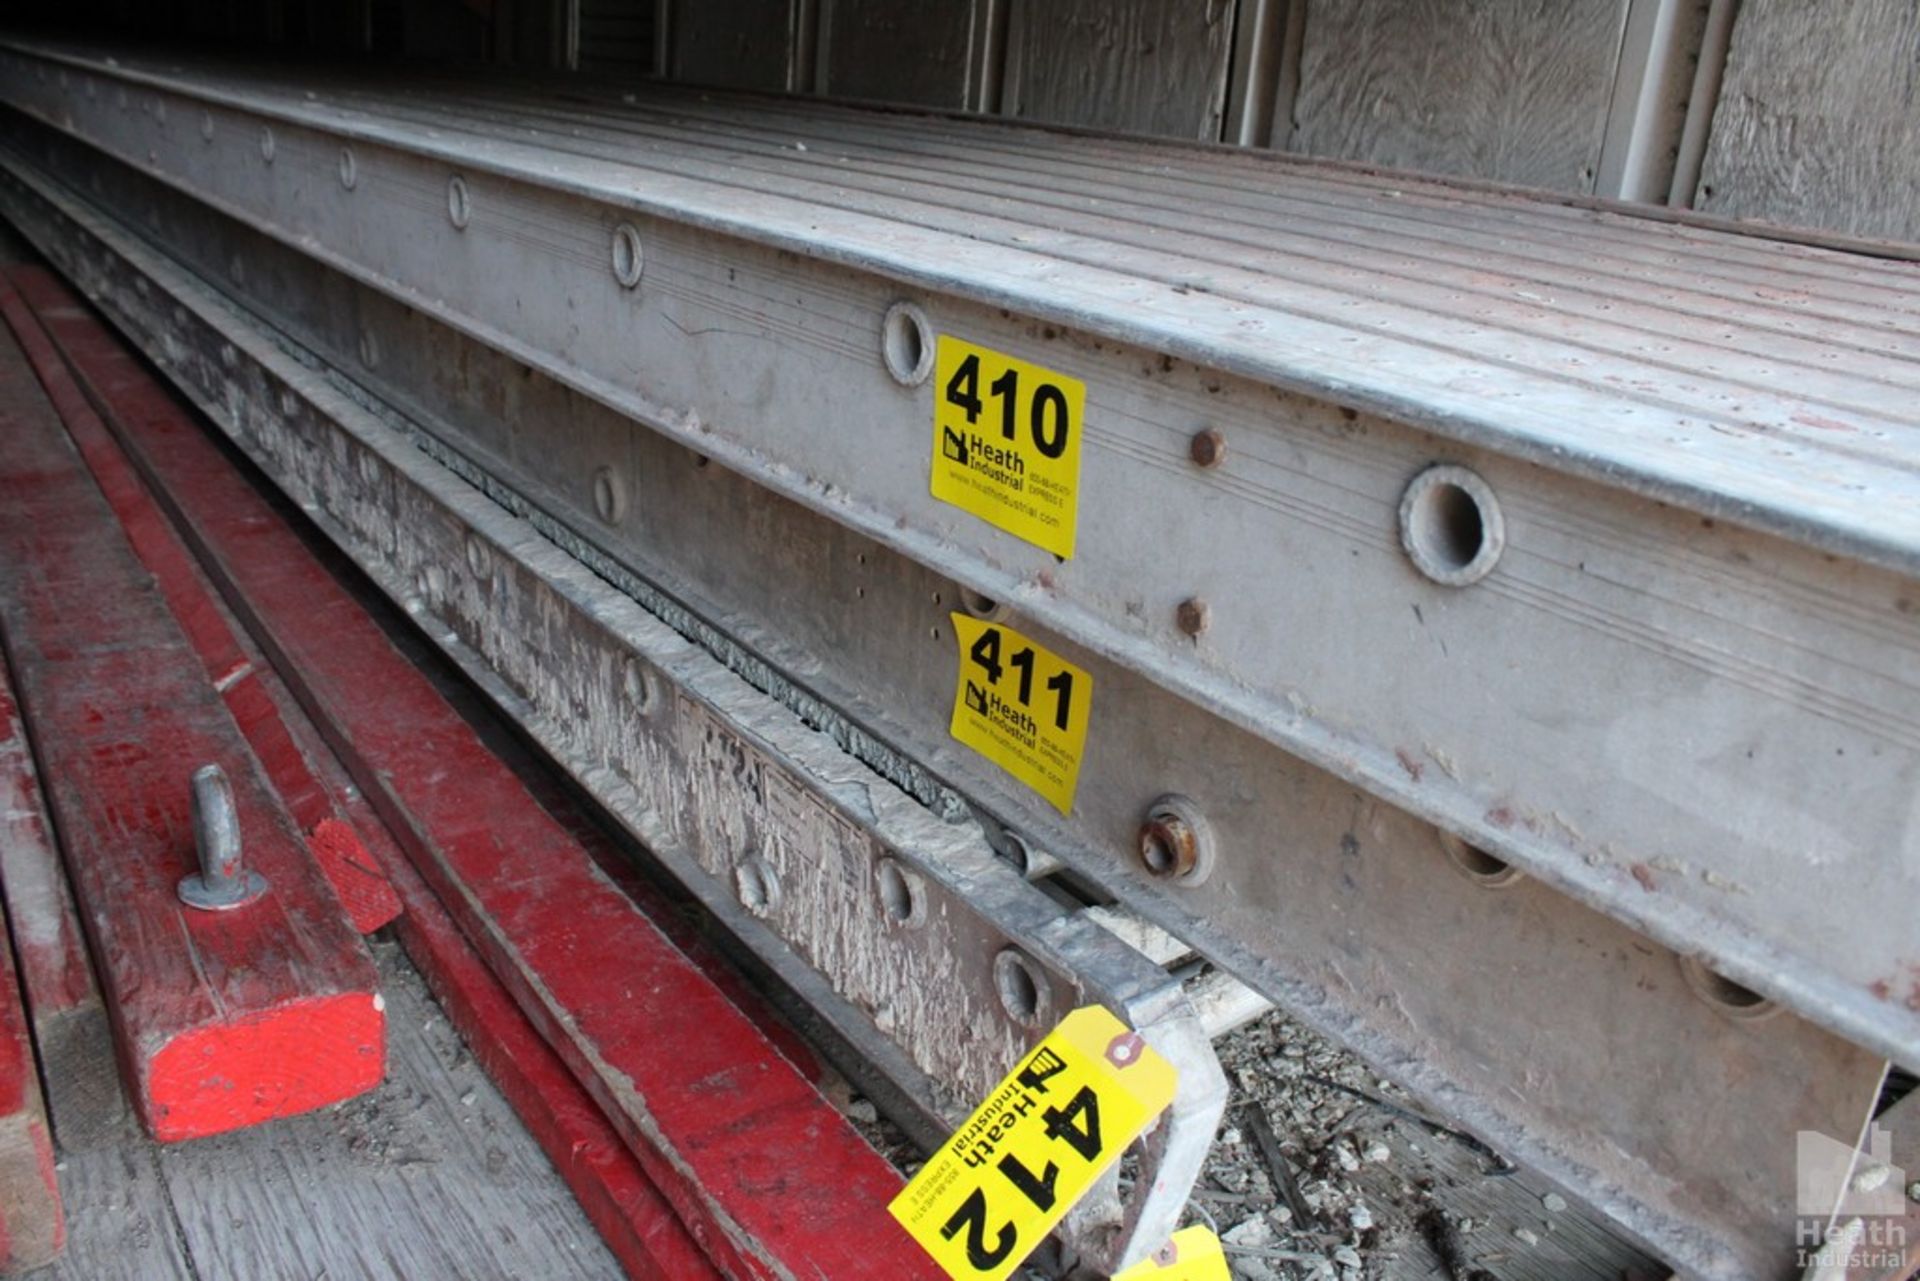 SECTION OF ALUMINUM SCAFFOLDING, 27" WIDE, 24FT. LONG